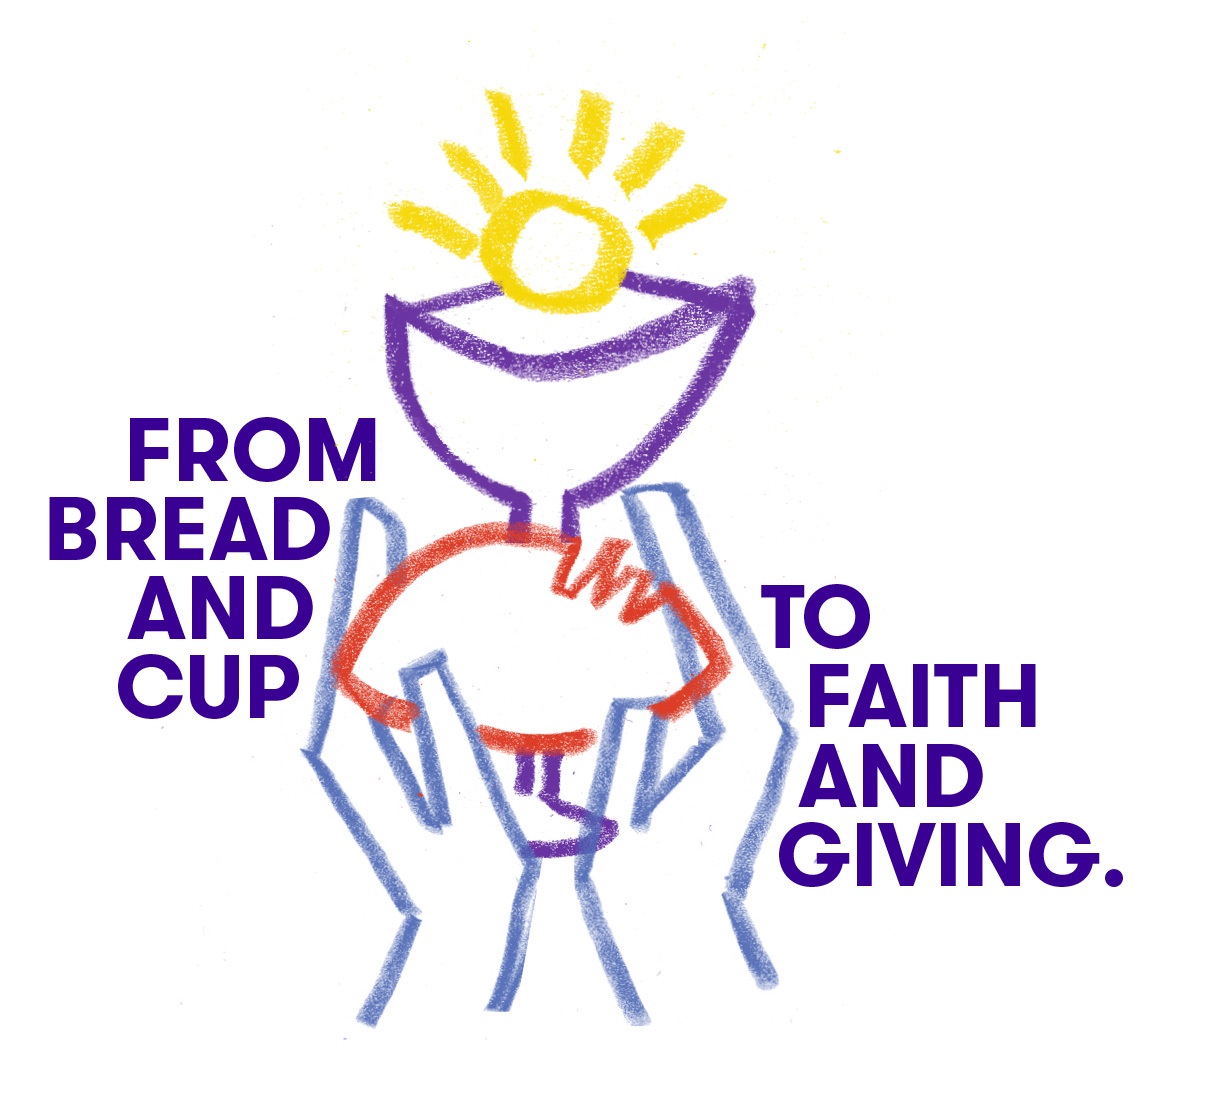 From Bread and Cup to Faith and Giving